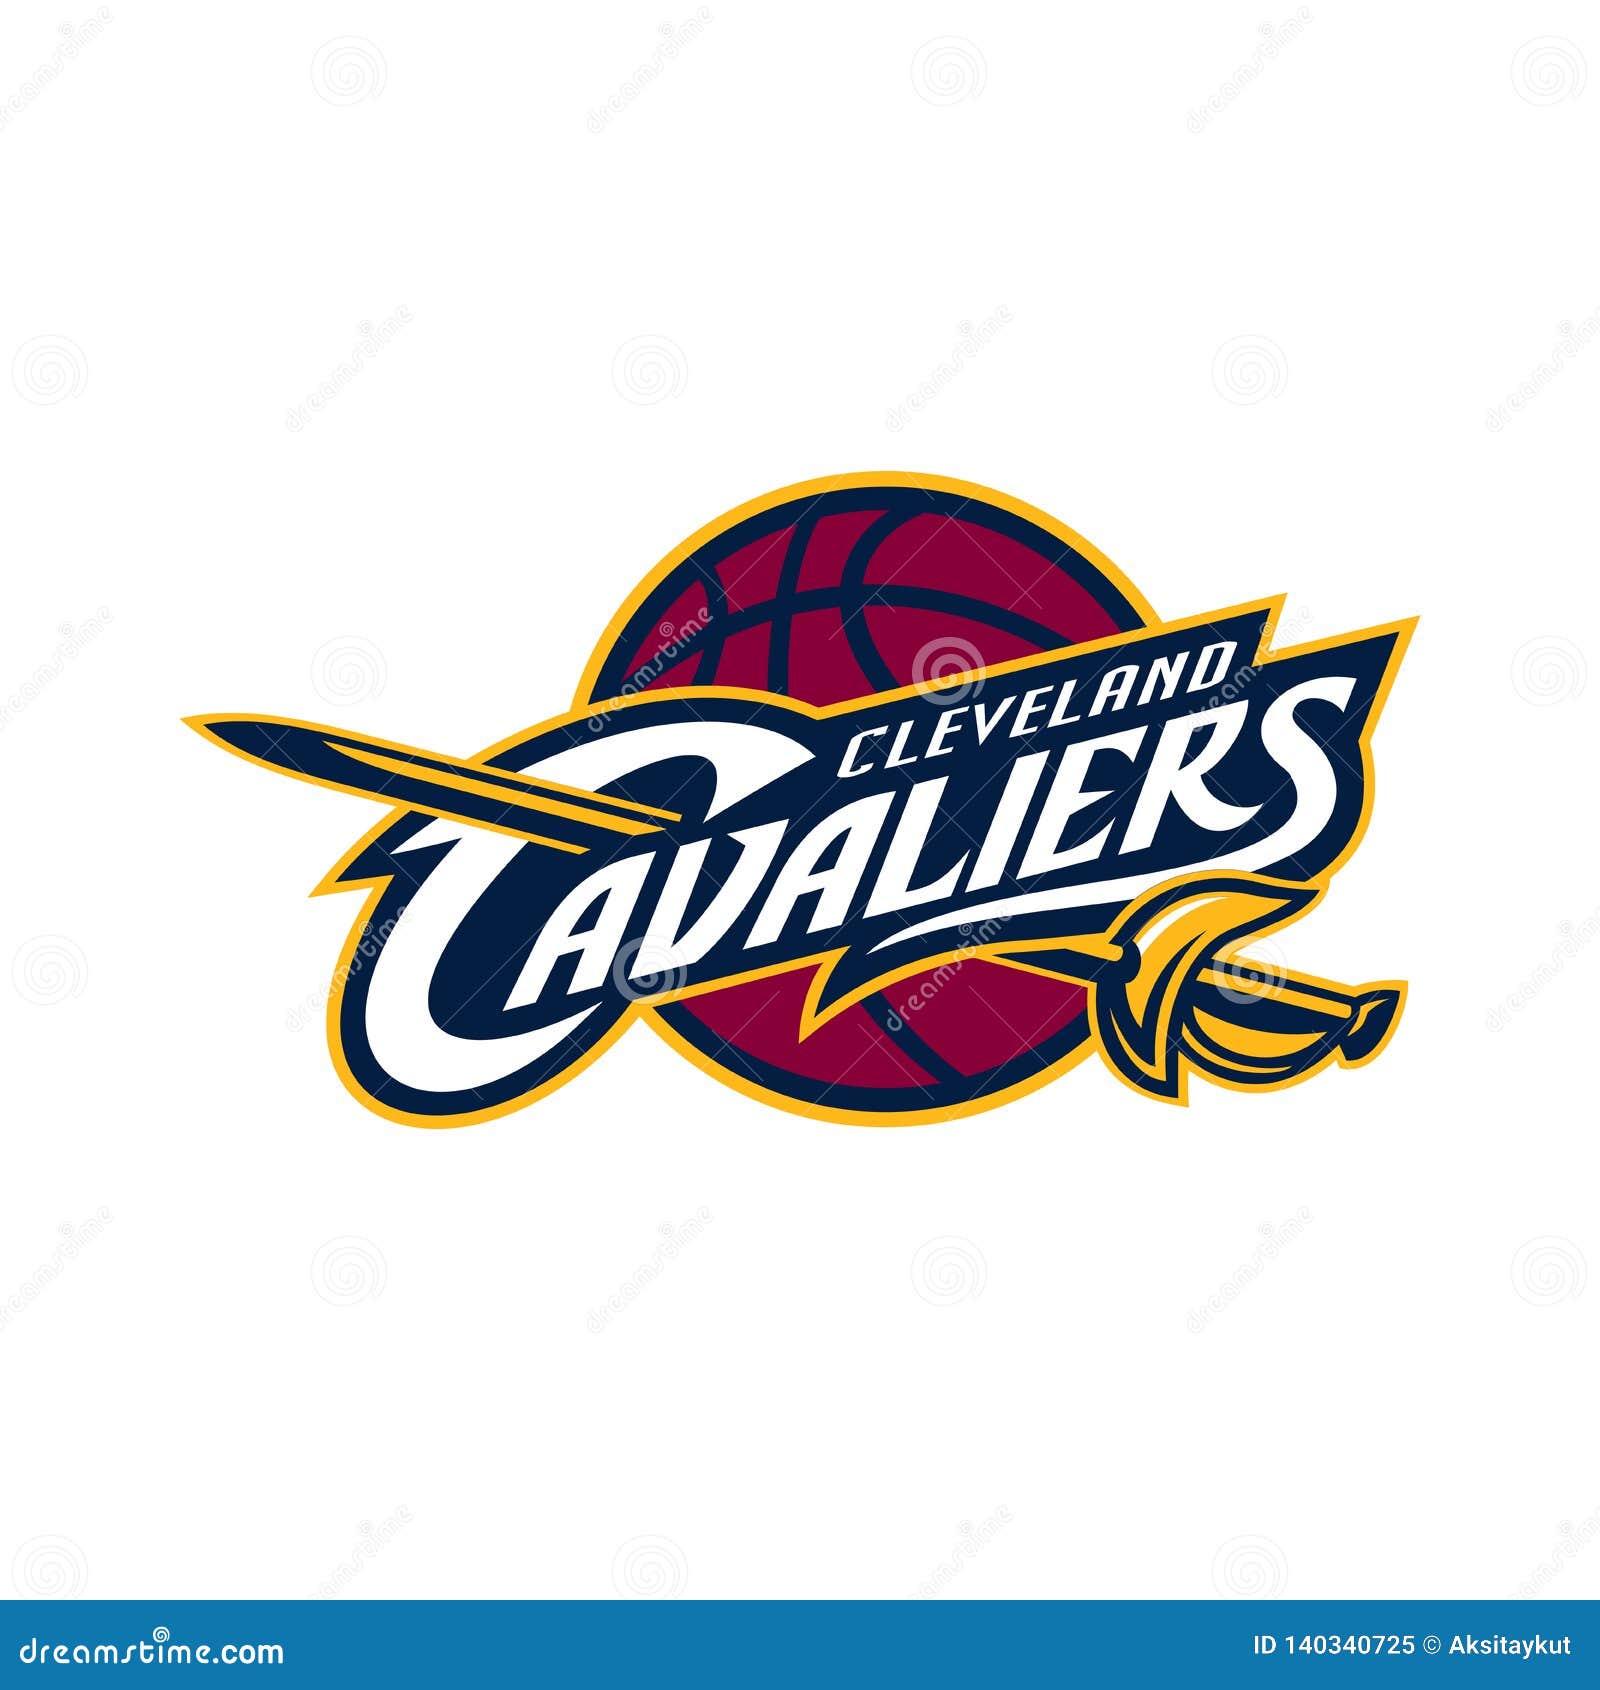 NBA Cavaliers - Font Free [ Download Now ]